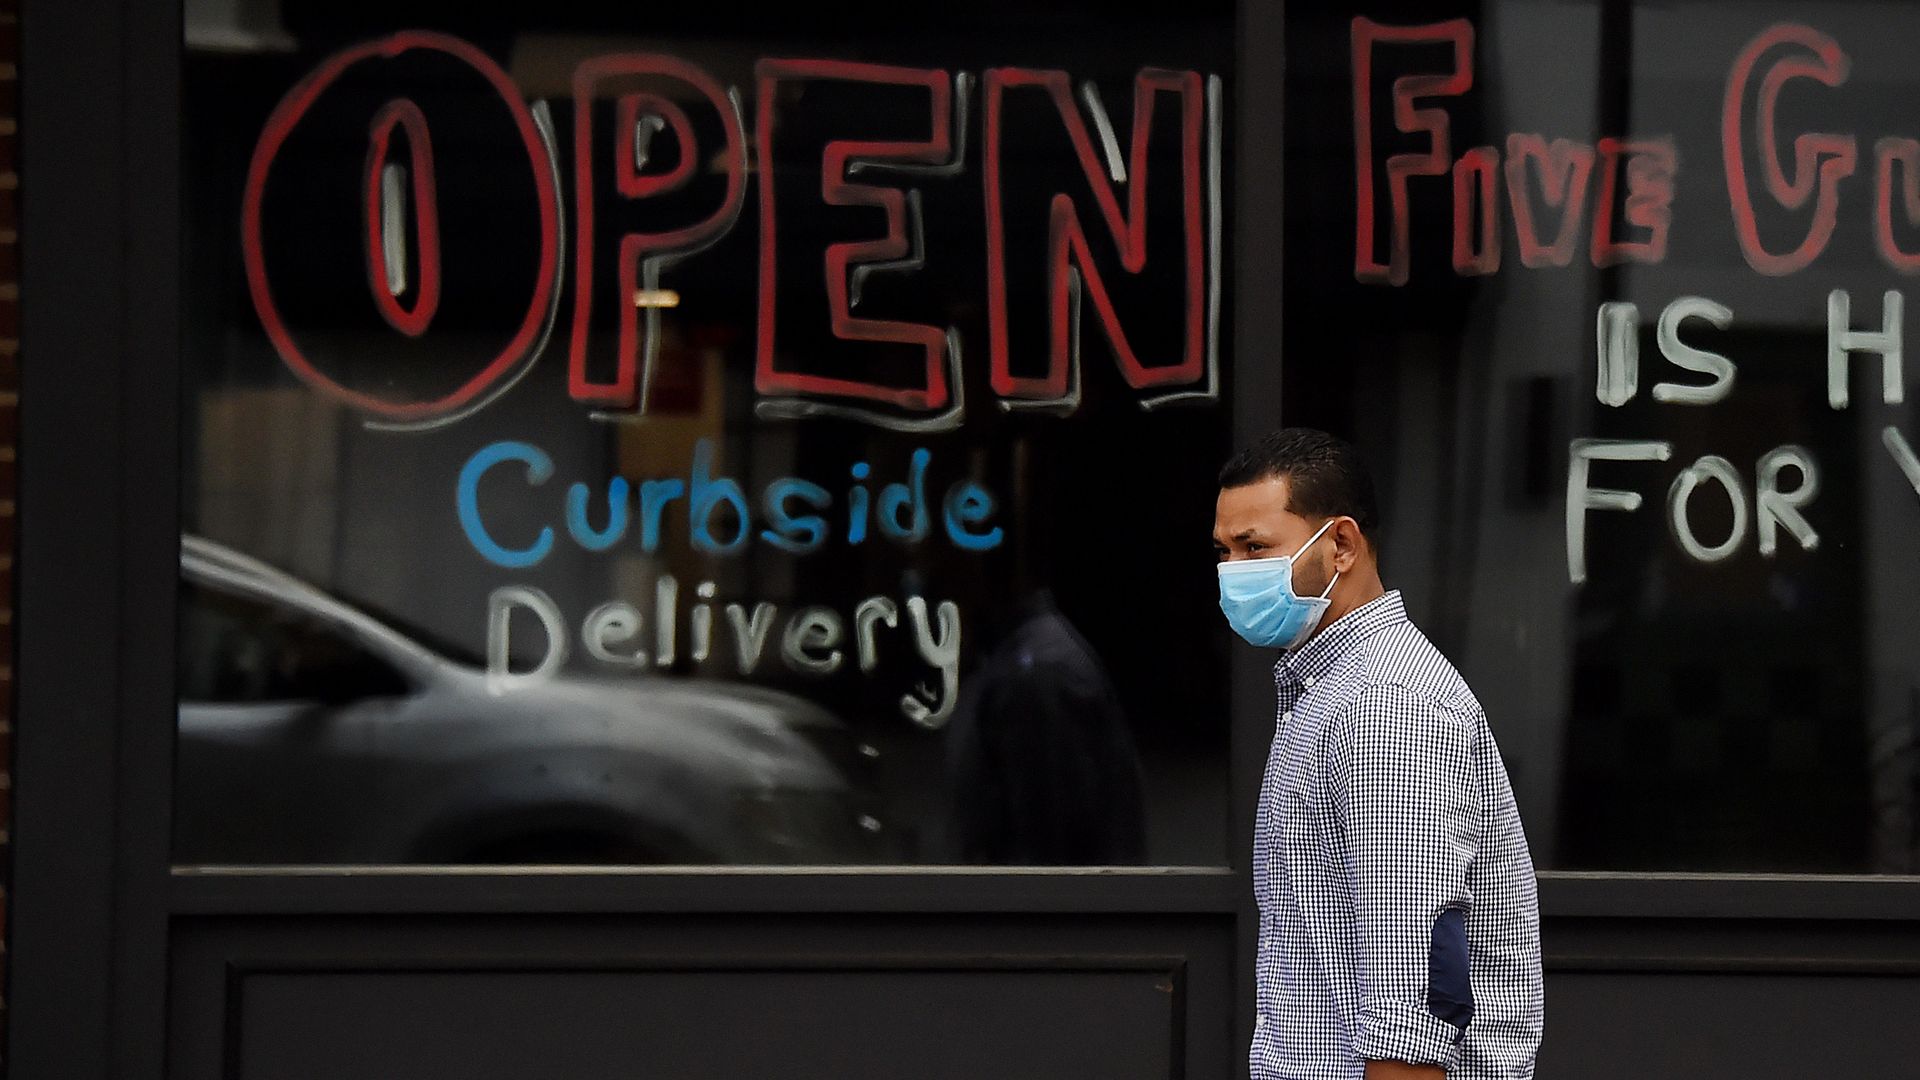 In this image, a man wears a mask and stands in front of a sign that reads "Open curbside delivery"